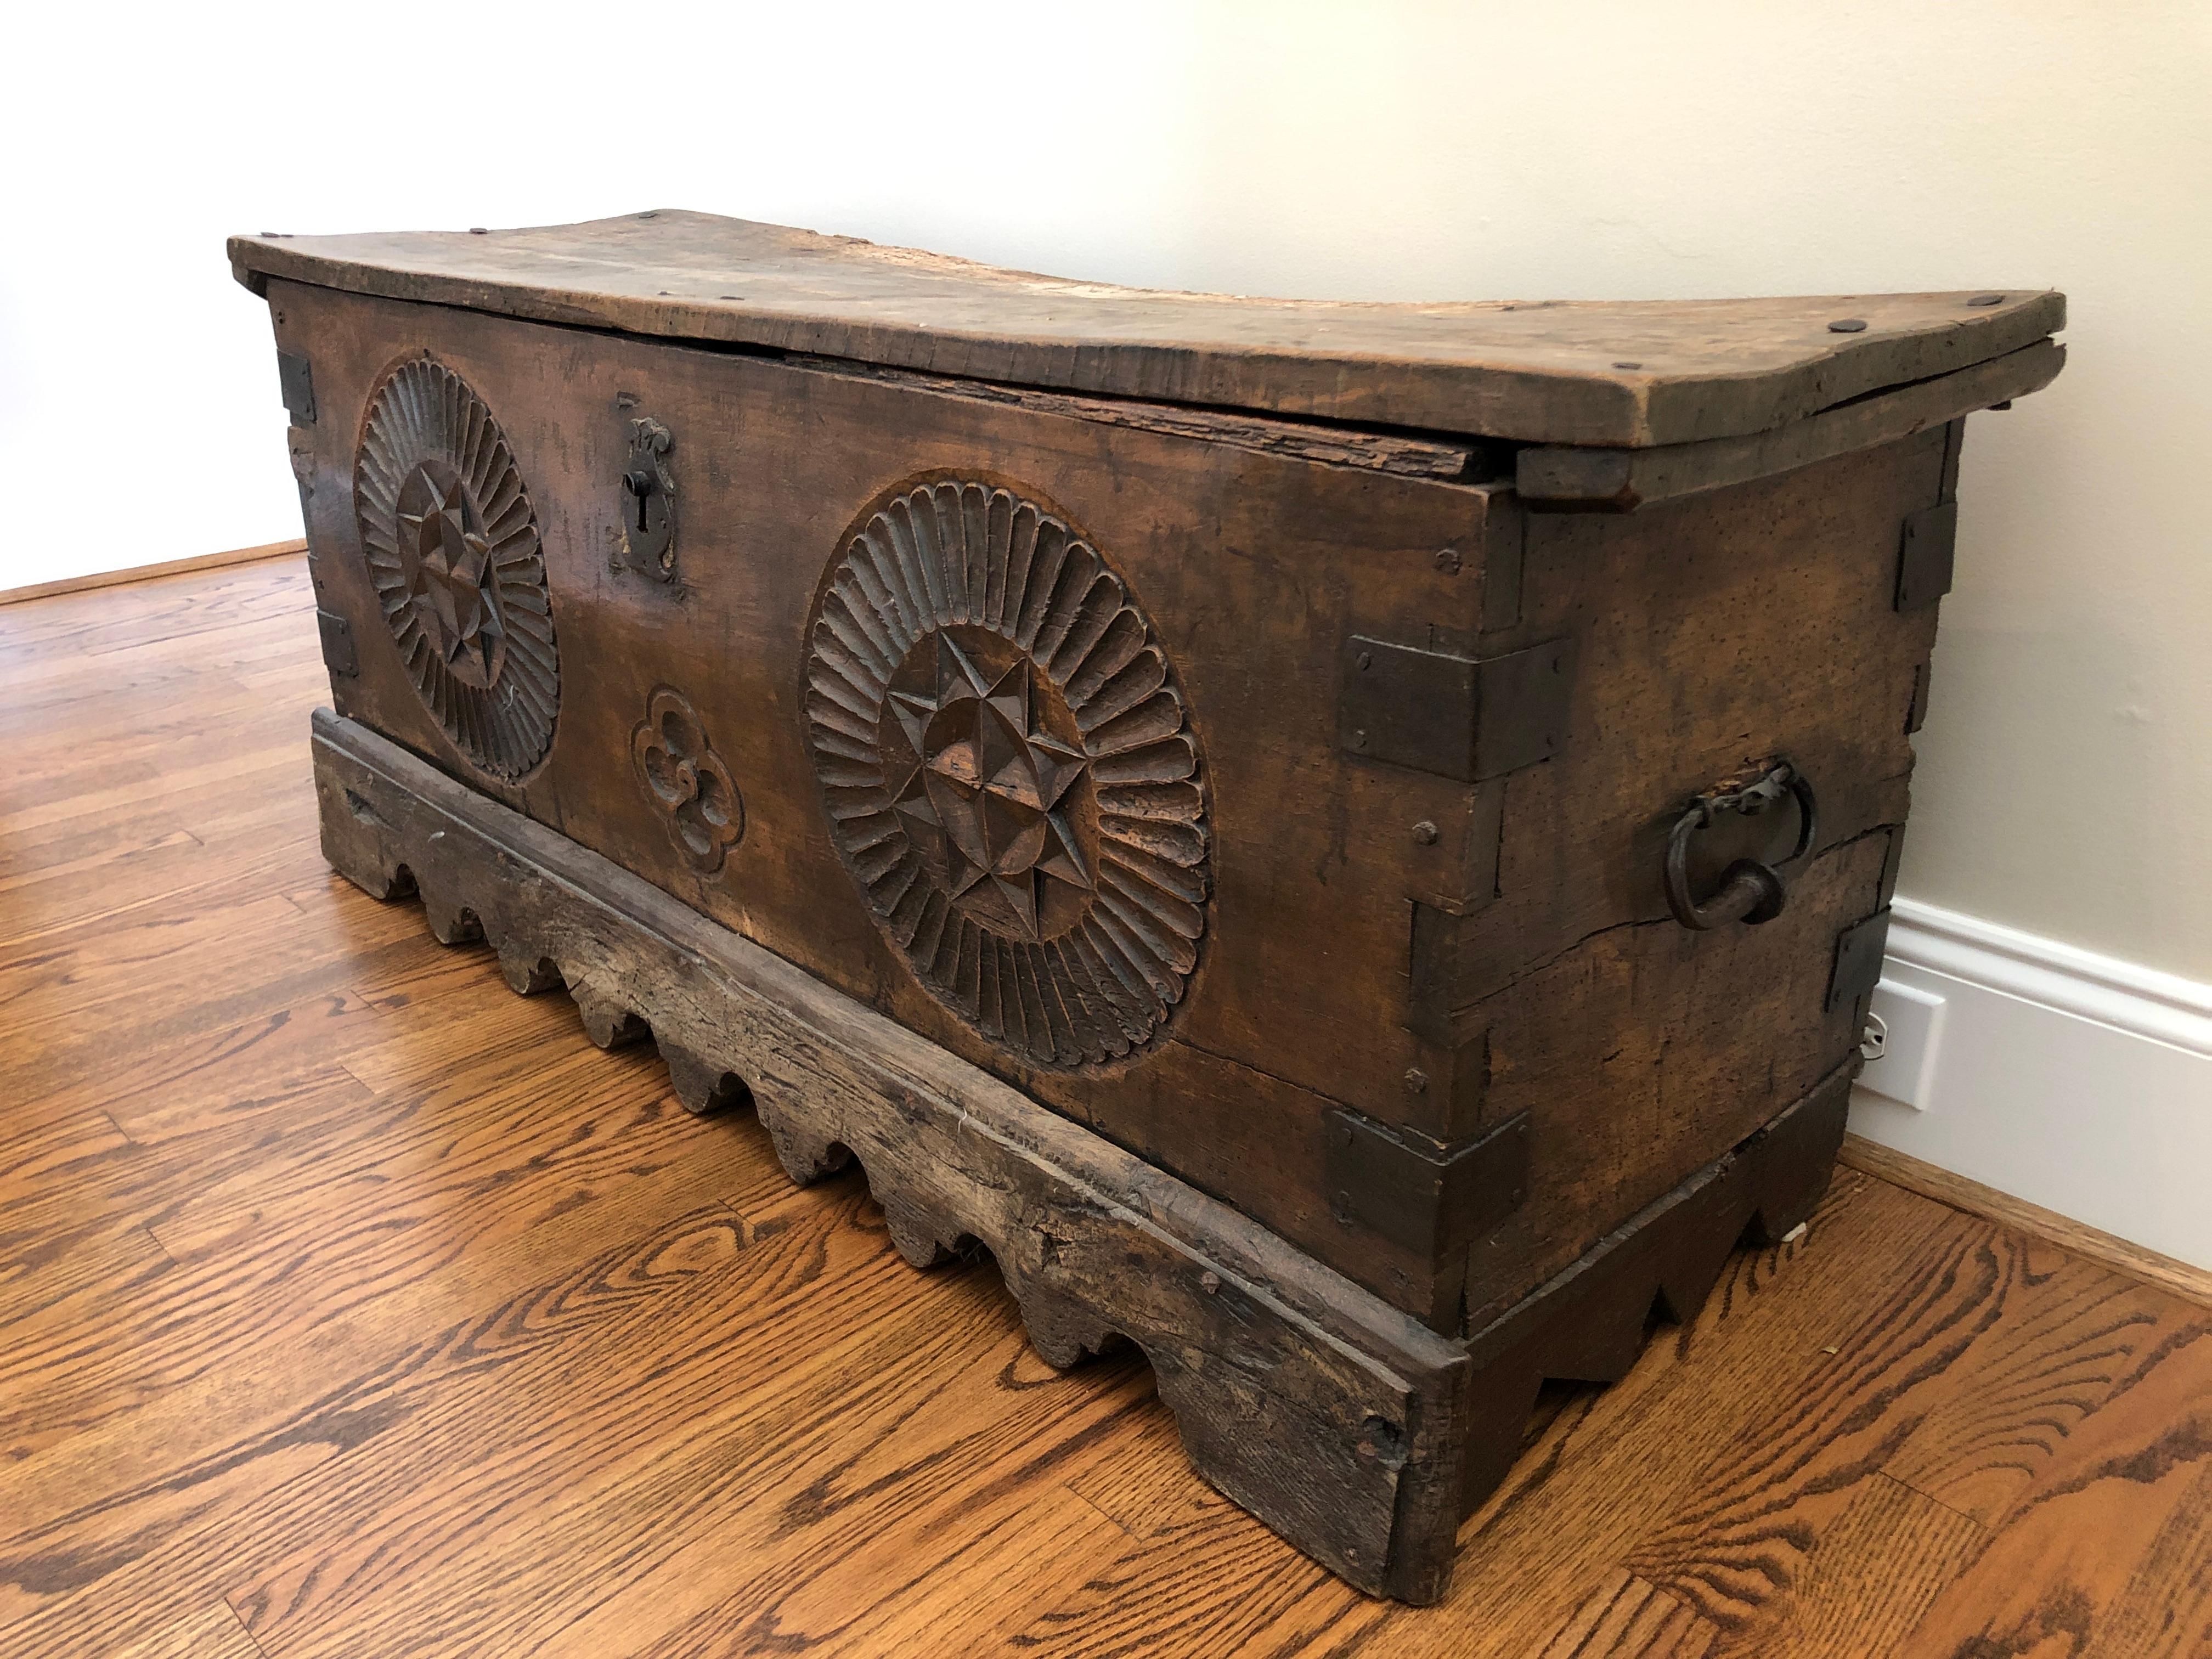 A coffer originating in Belgium in the 16th century. This trunk was recovered from the ruins of a medieval Belgian monastery in the 1990s by its current owner. 

Measures: 51 W 18 D 25 H

Good original condition. Has been treated for insects.